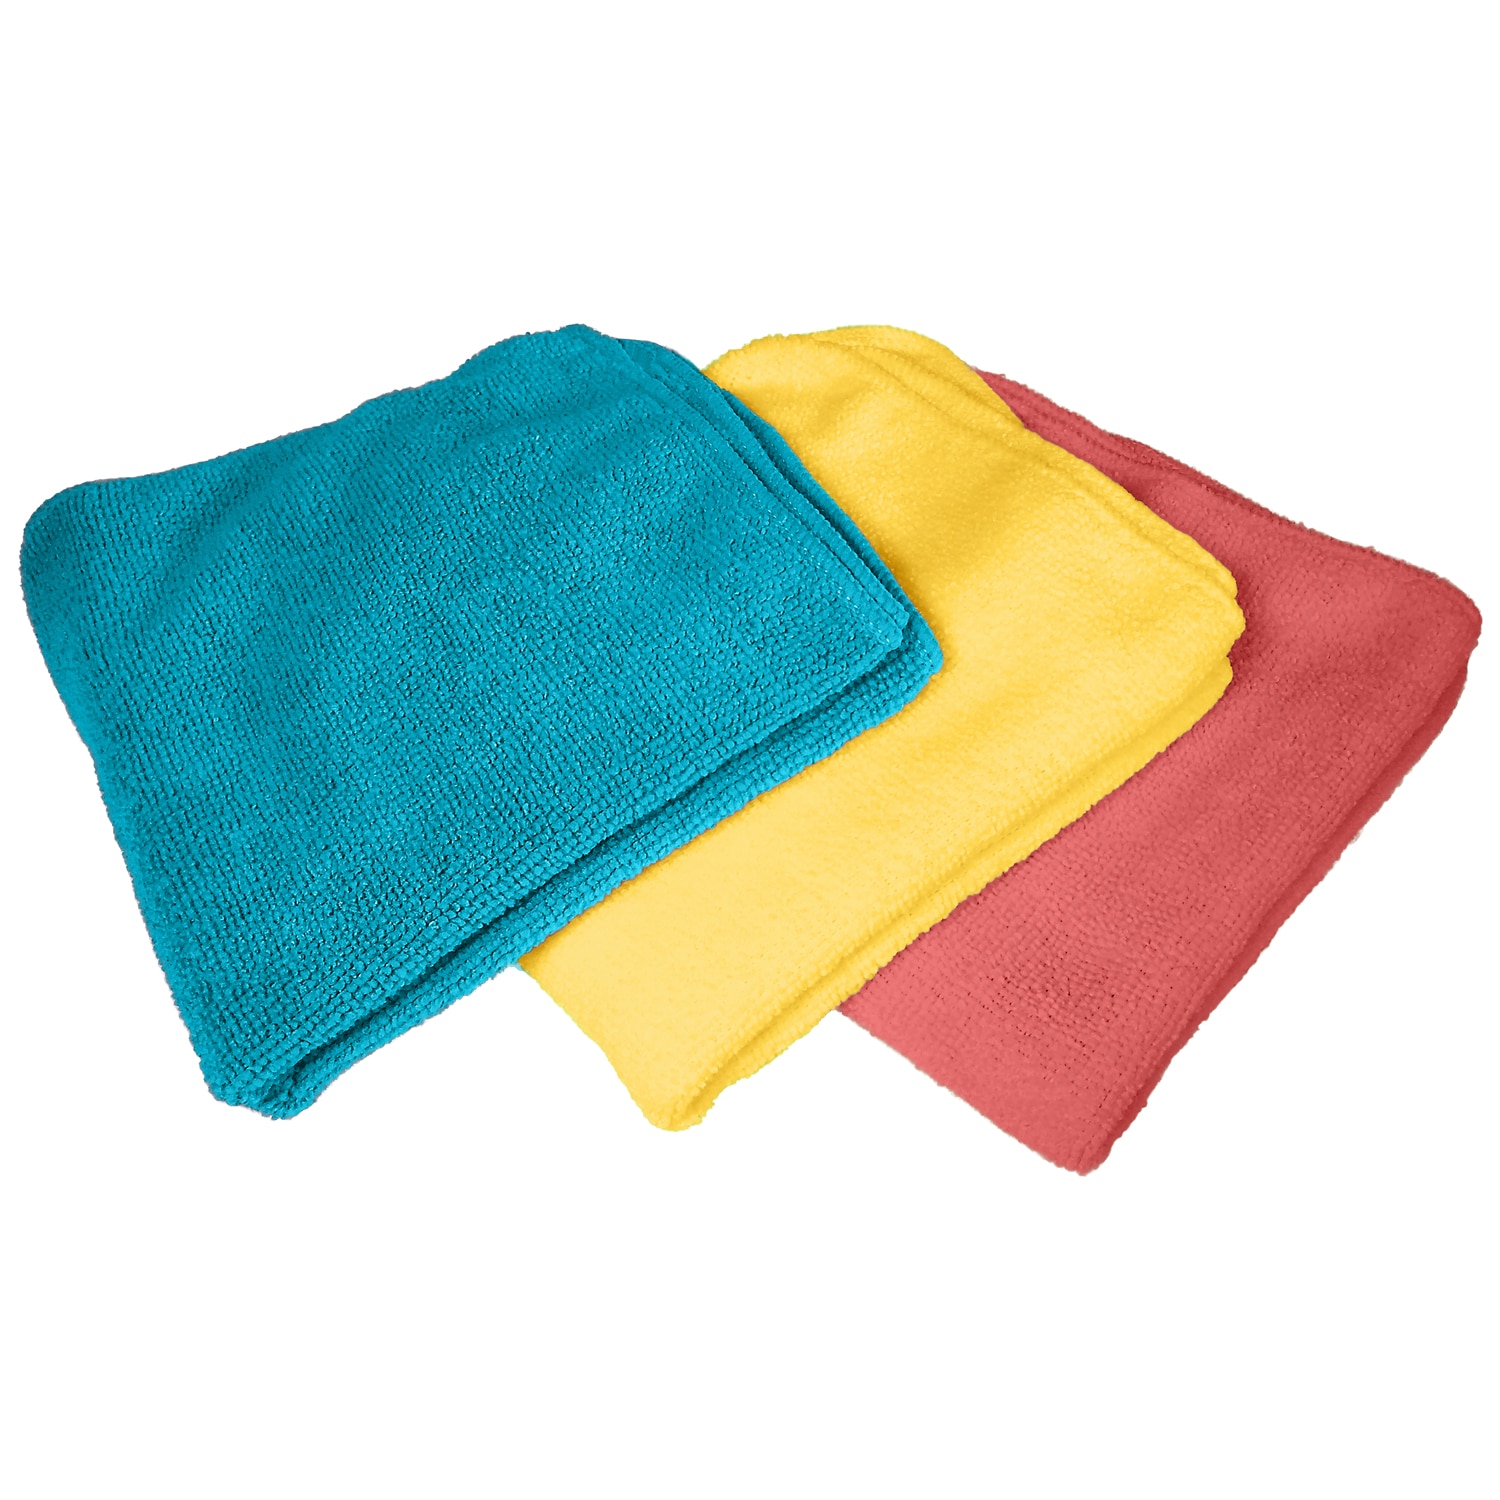 Terry Cloth Cleaning Towels - 60 Pack